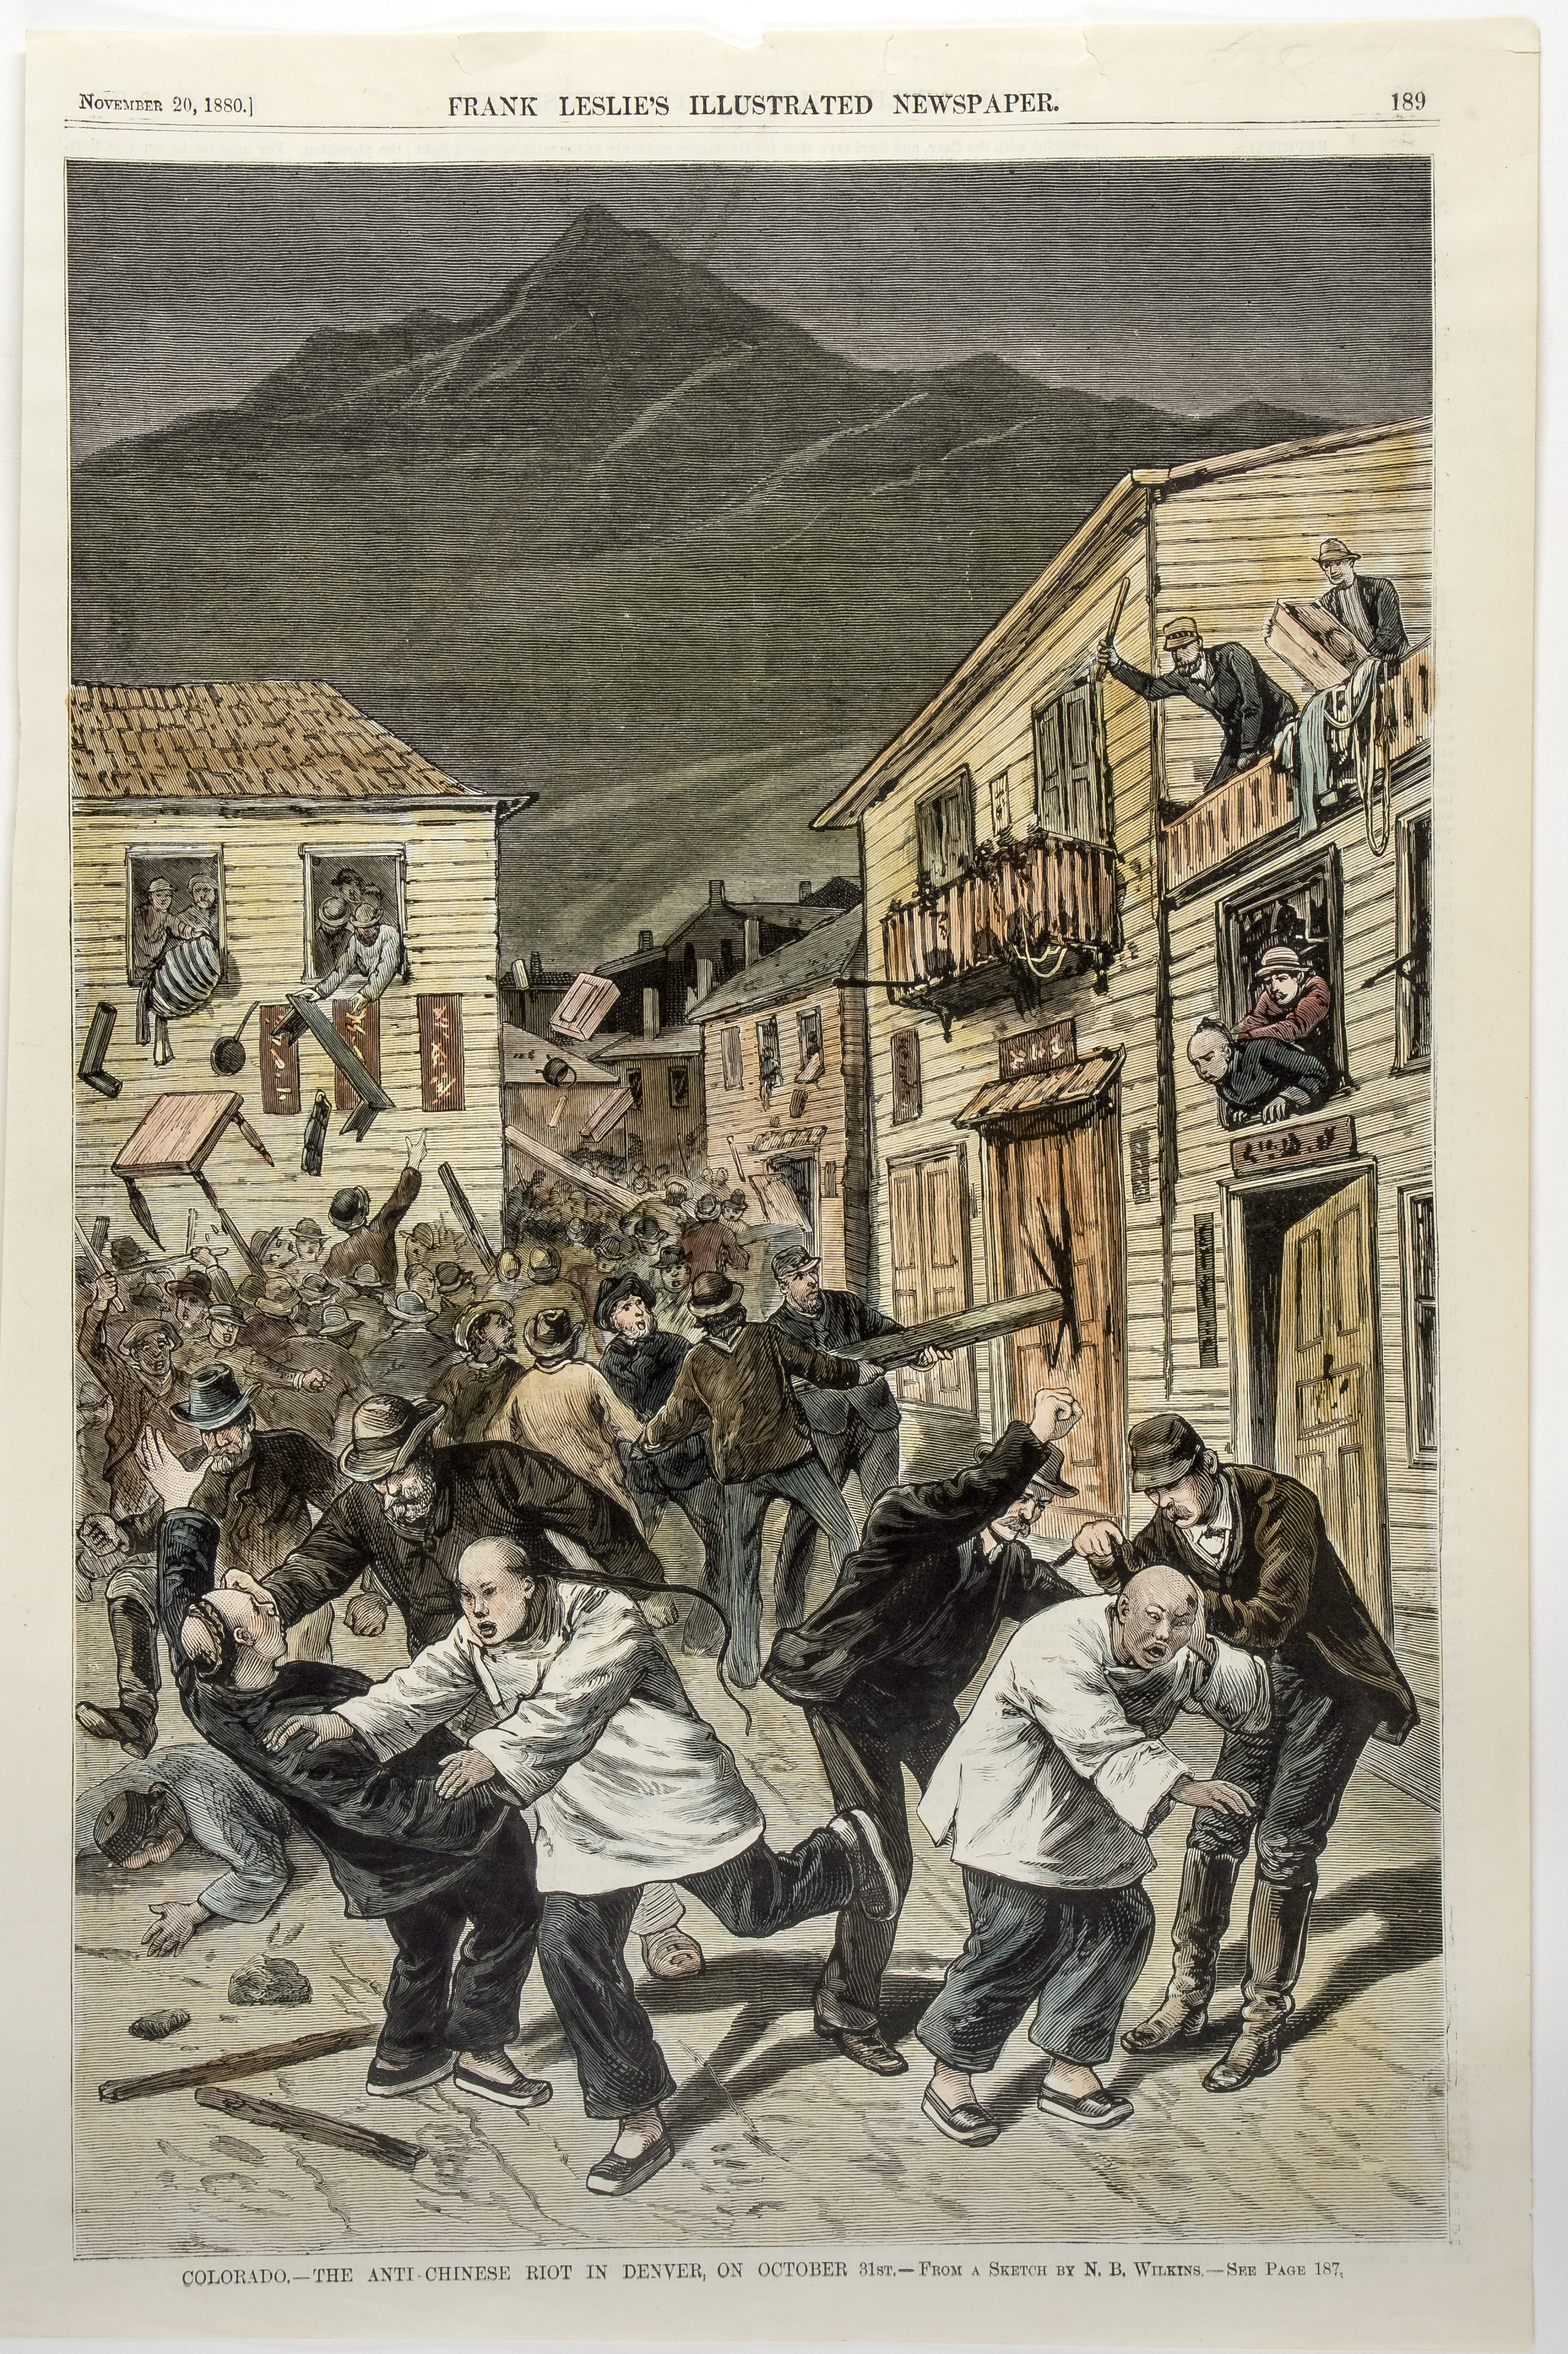 Image of a newspaper illustration of the anti-Chinese riot in Denver in 1880. In the foreground, white western-looking men are striking Chinese men. One Chinese man is holding his head where he has been hit, while another is running away and yet another is lying face-down on the ground. In the background, rioters in building windows are throwing furniture out of the windows and fighting with other Chinese men. A group of rioters are breaking down the doors of an establishment using a long wooden post.